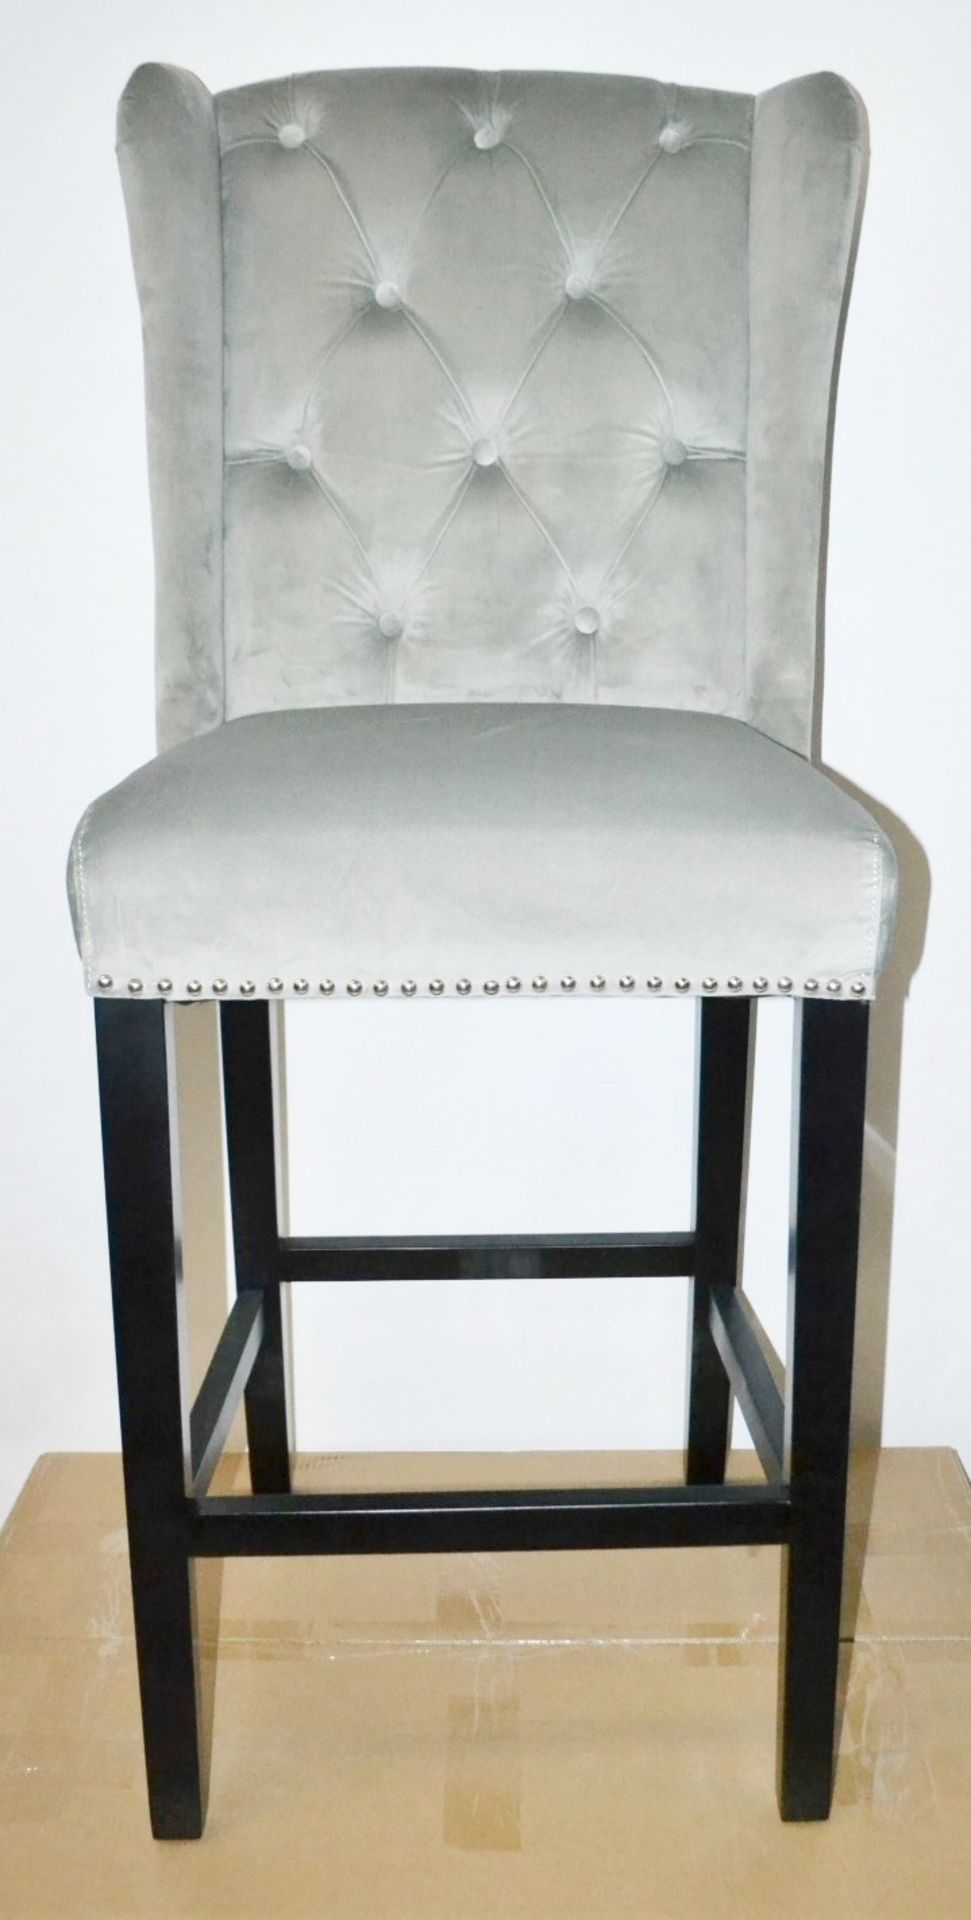 3 x HOUSE OF SPARKLES Luxury Wing Back Bar Stools In A Silver Velvet With BLACK Legs - Image 6 of 8